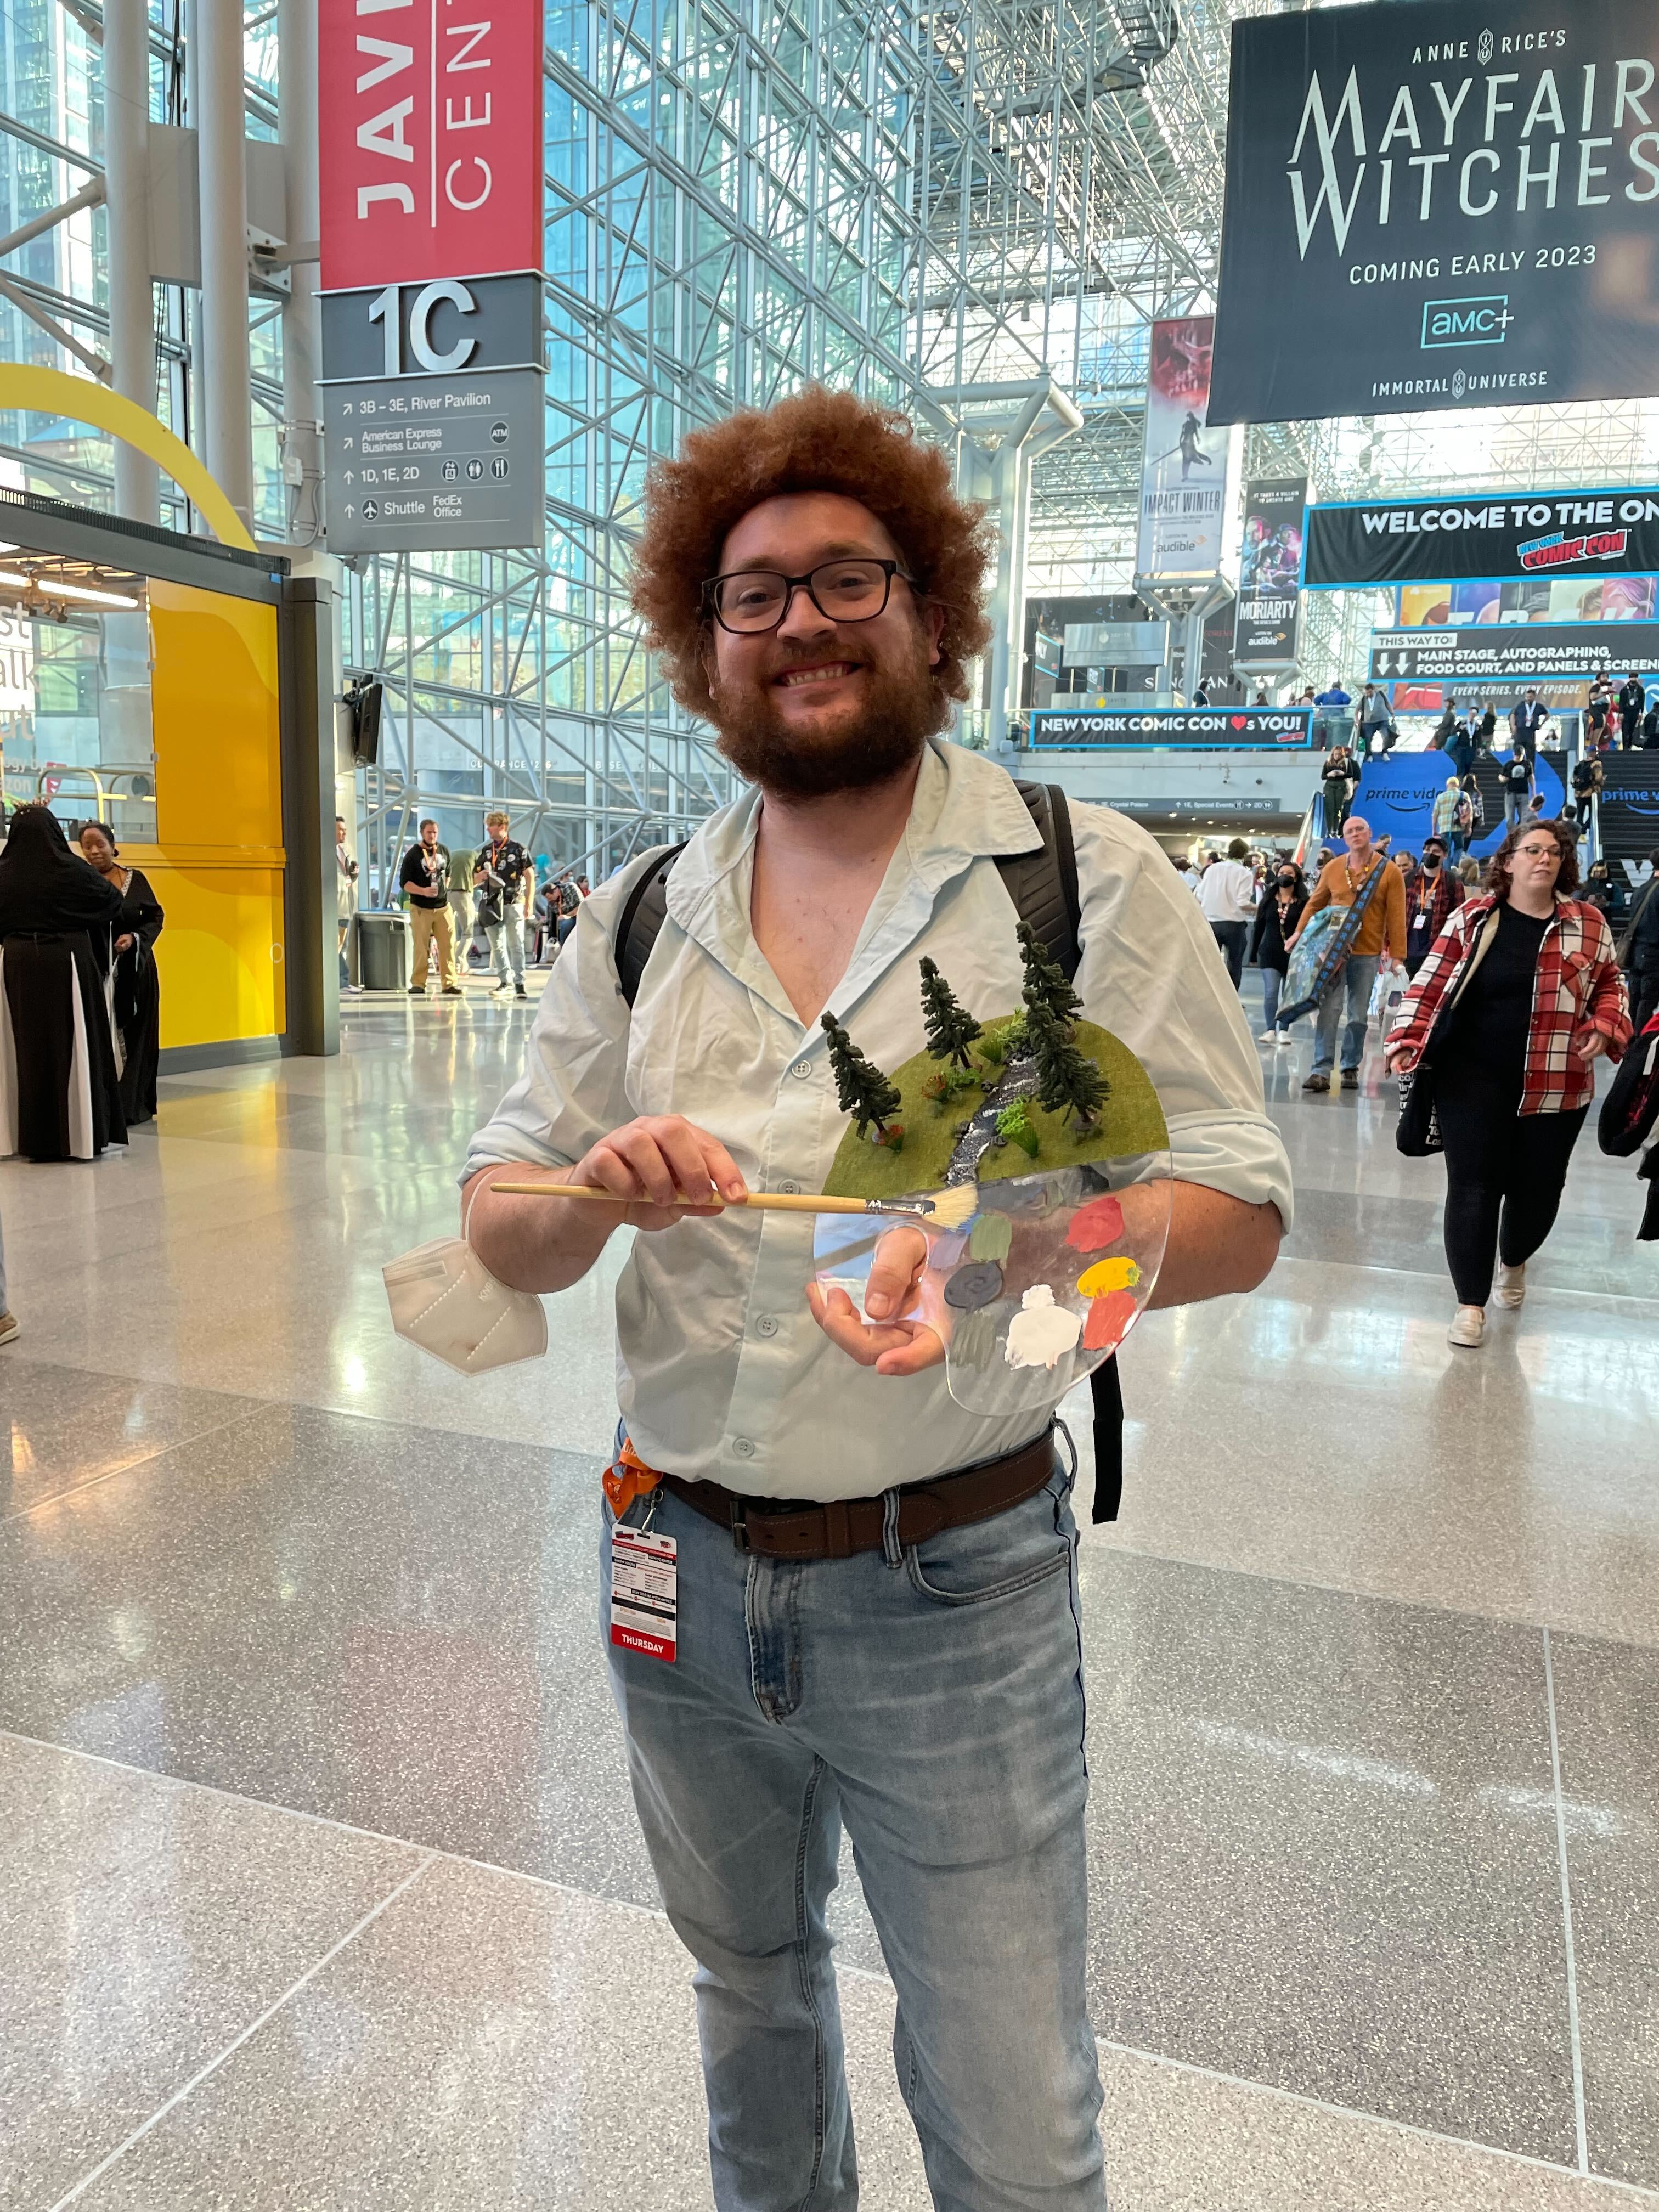 New York Comic Con Cosplay - snapshot - Javi Cent 1C Annyis Mayfair Witches Coming Early 2021 Dmc Welcome To The On